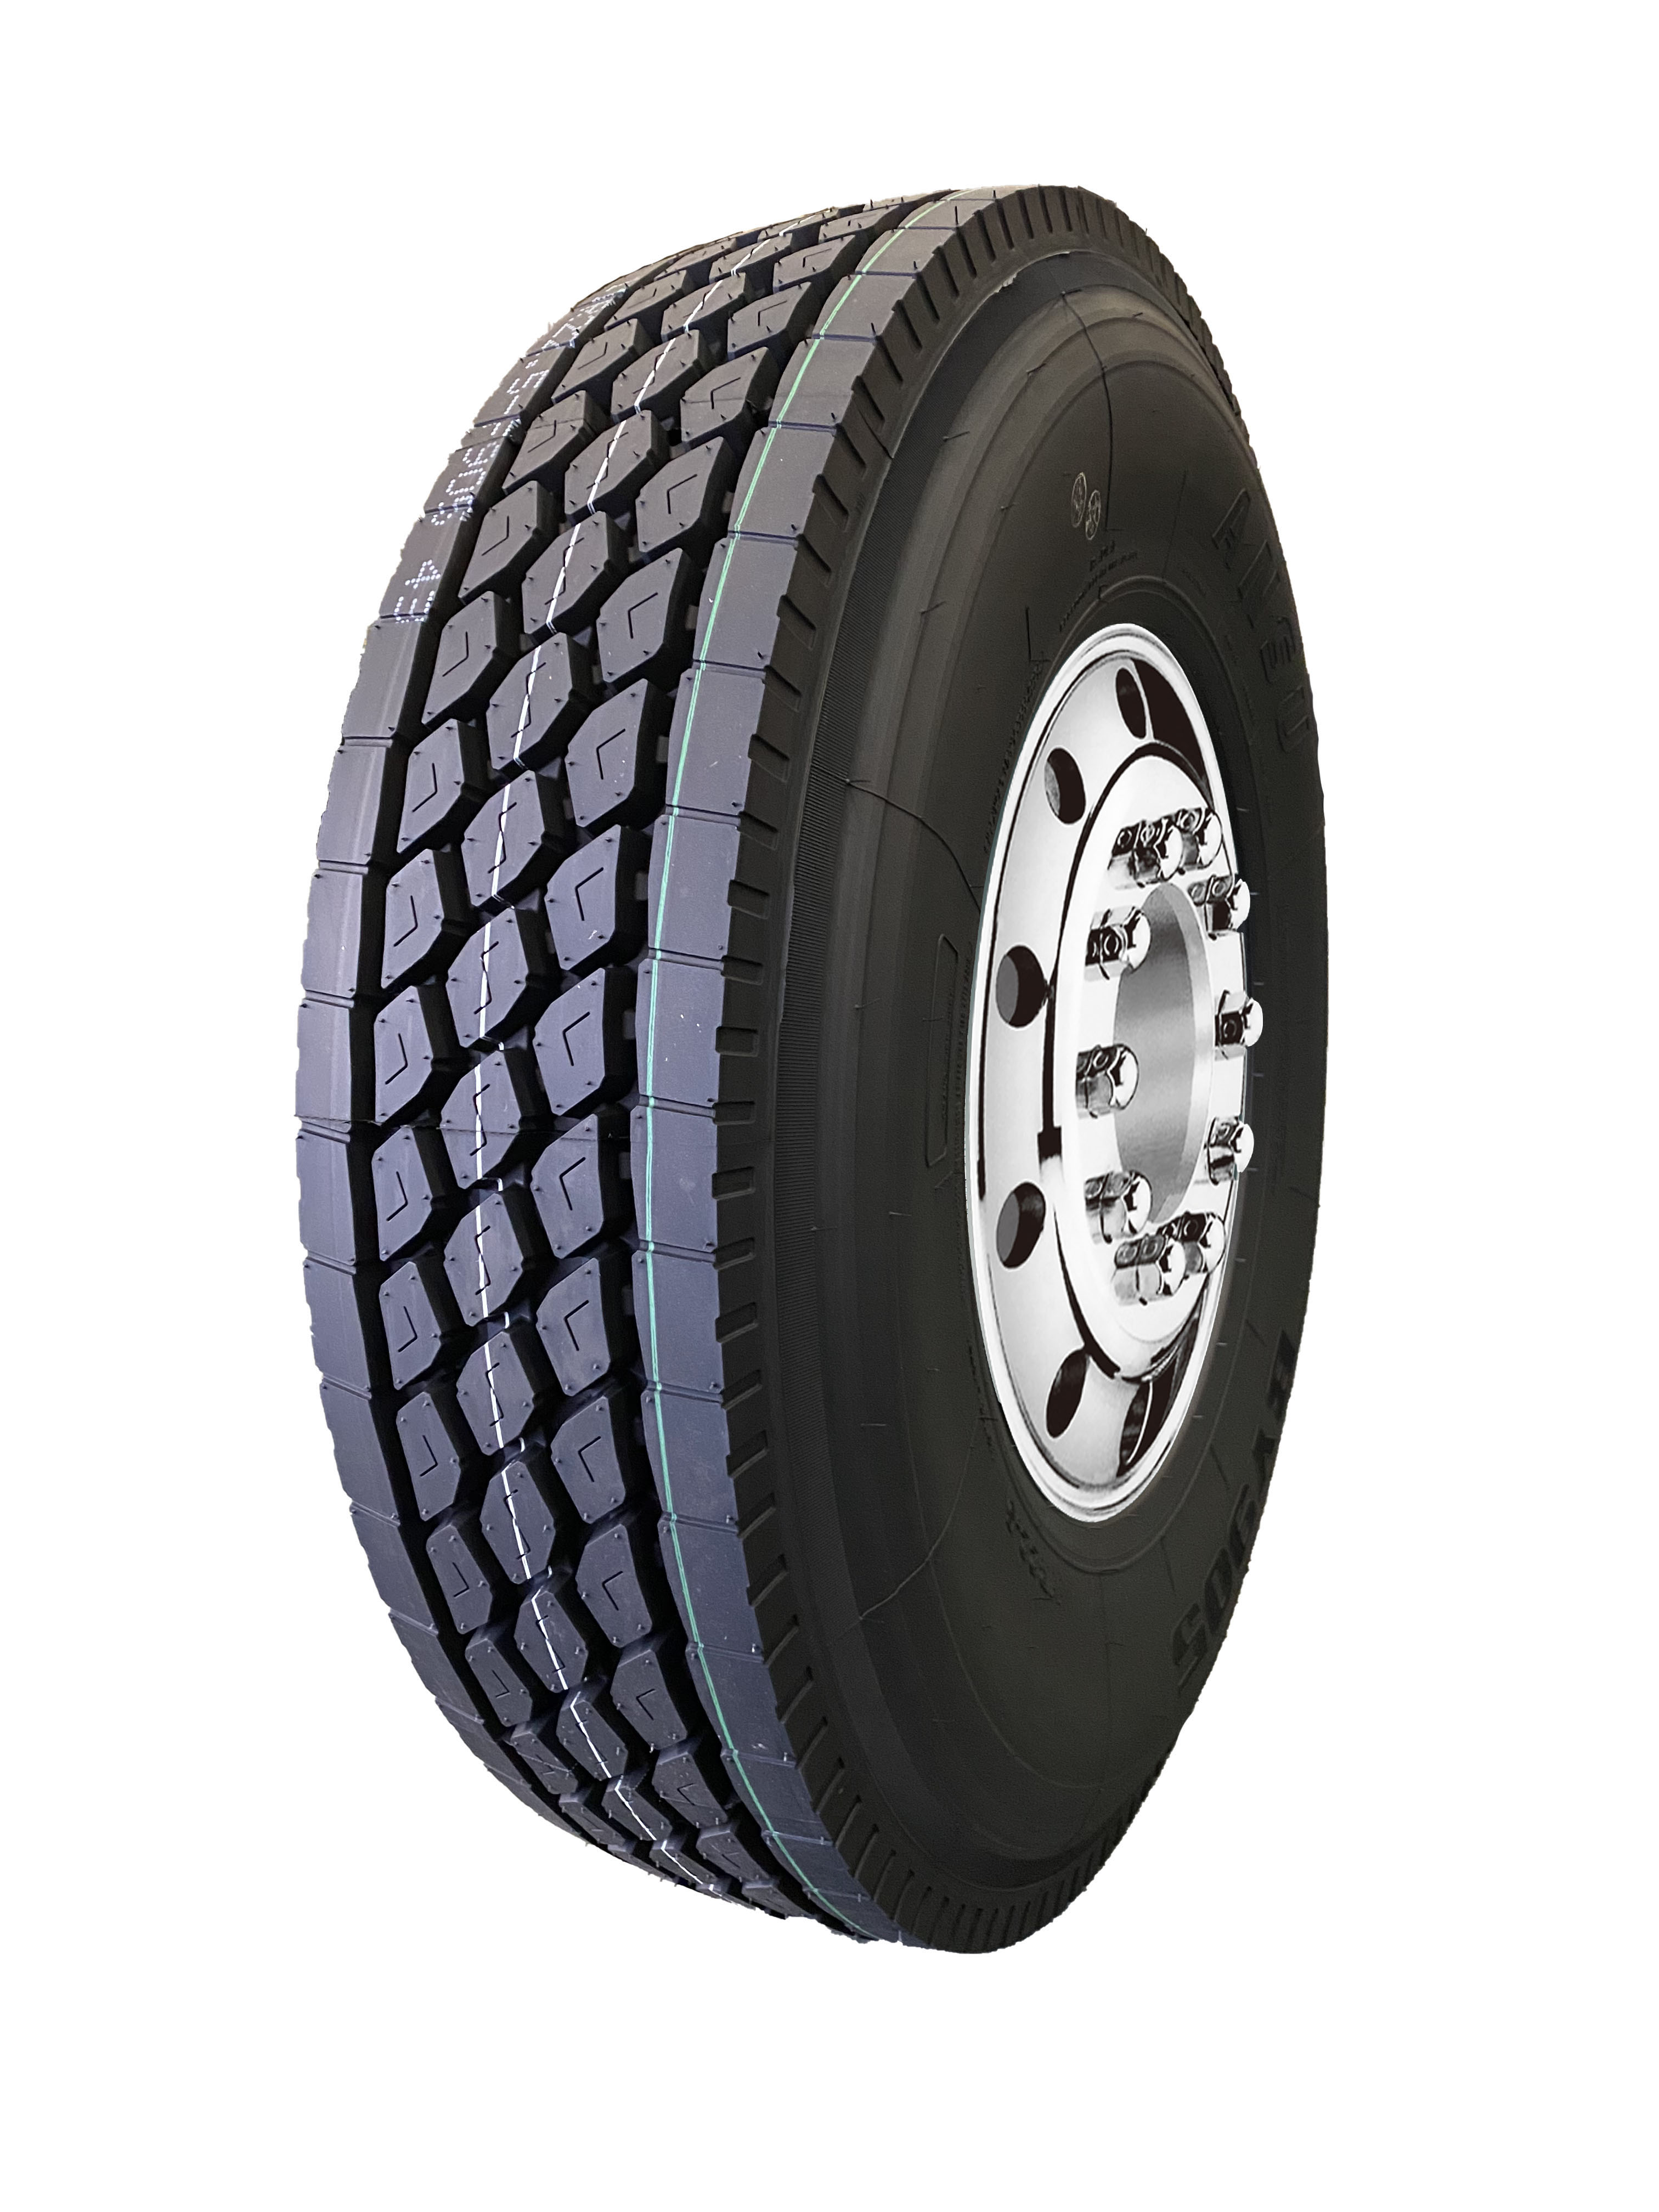 295/75R22.5 BY905